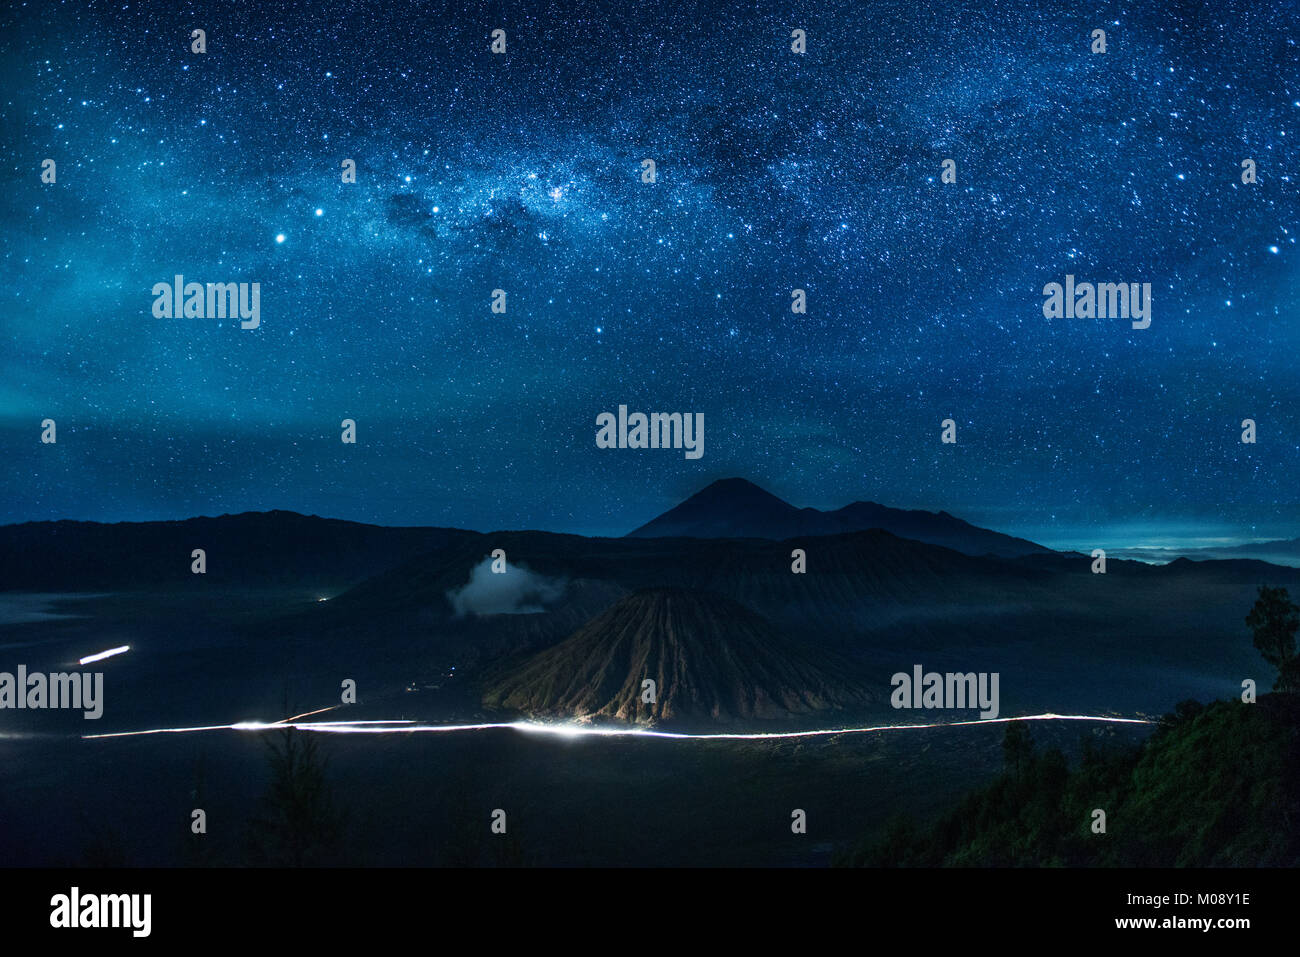 Dreamy view of Mount bromo and millions stars in the sky at night, Indonesia Stock Photo